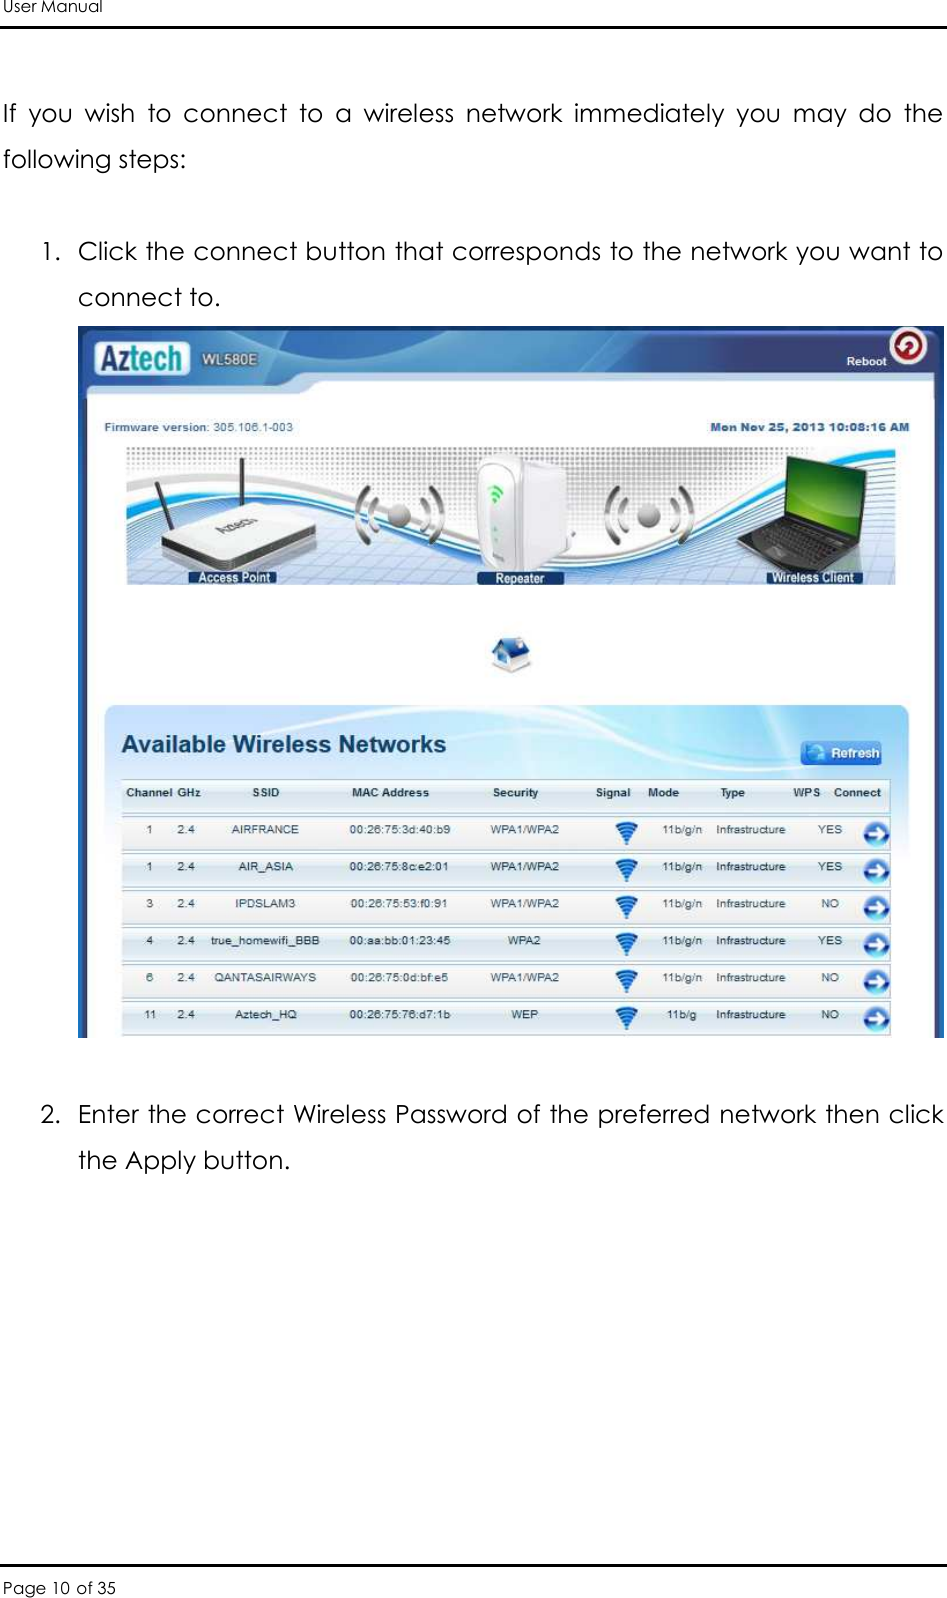 User Manual Page 10 of 35  If  you  wish  to  connect  to  a  wireless  network  immediately  you  may  do  the following steps:   1. Click the connect button that corresponds to the network you want to connect to.    2. Enter the correct Wireless Password of the preferred network then click the Apply button. 